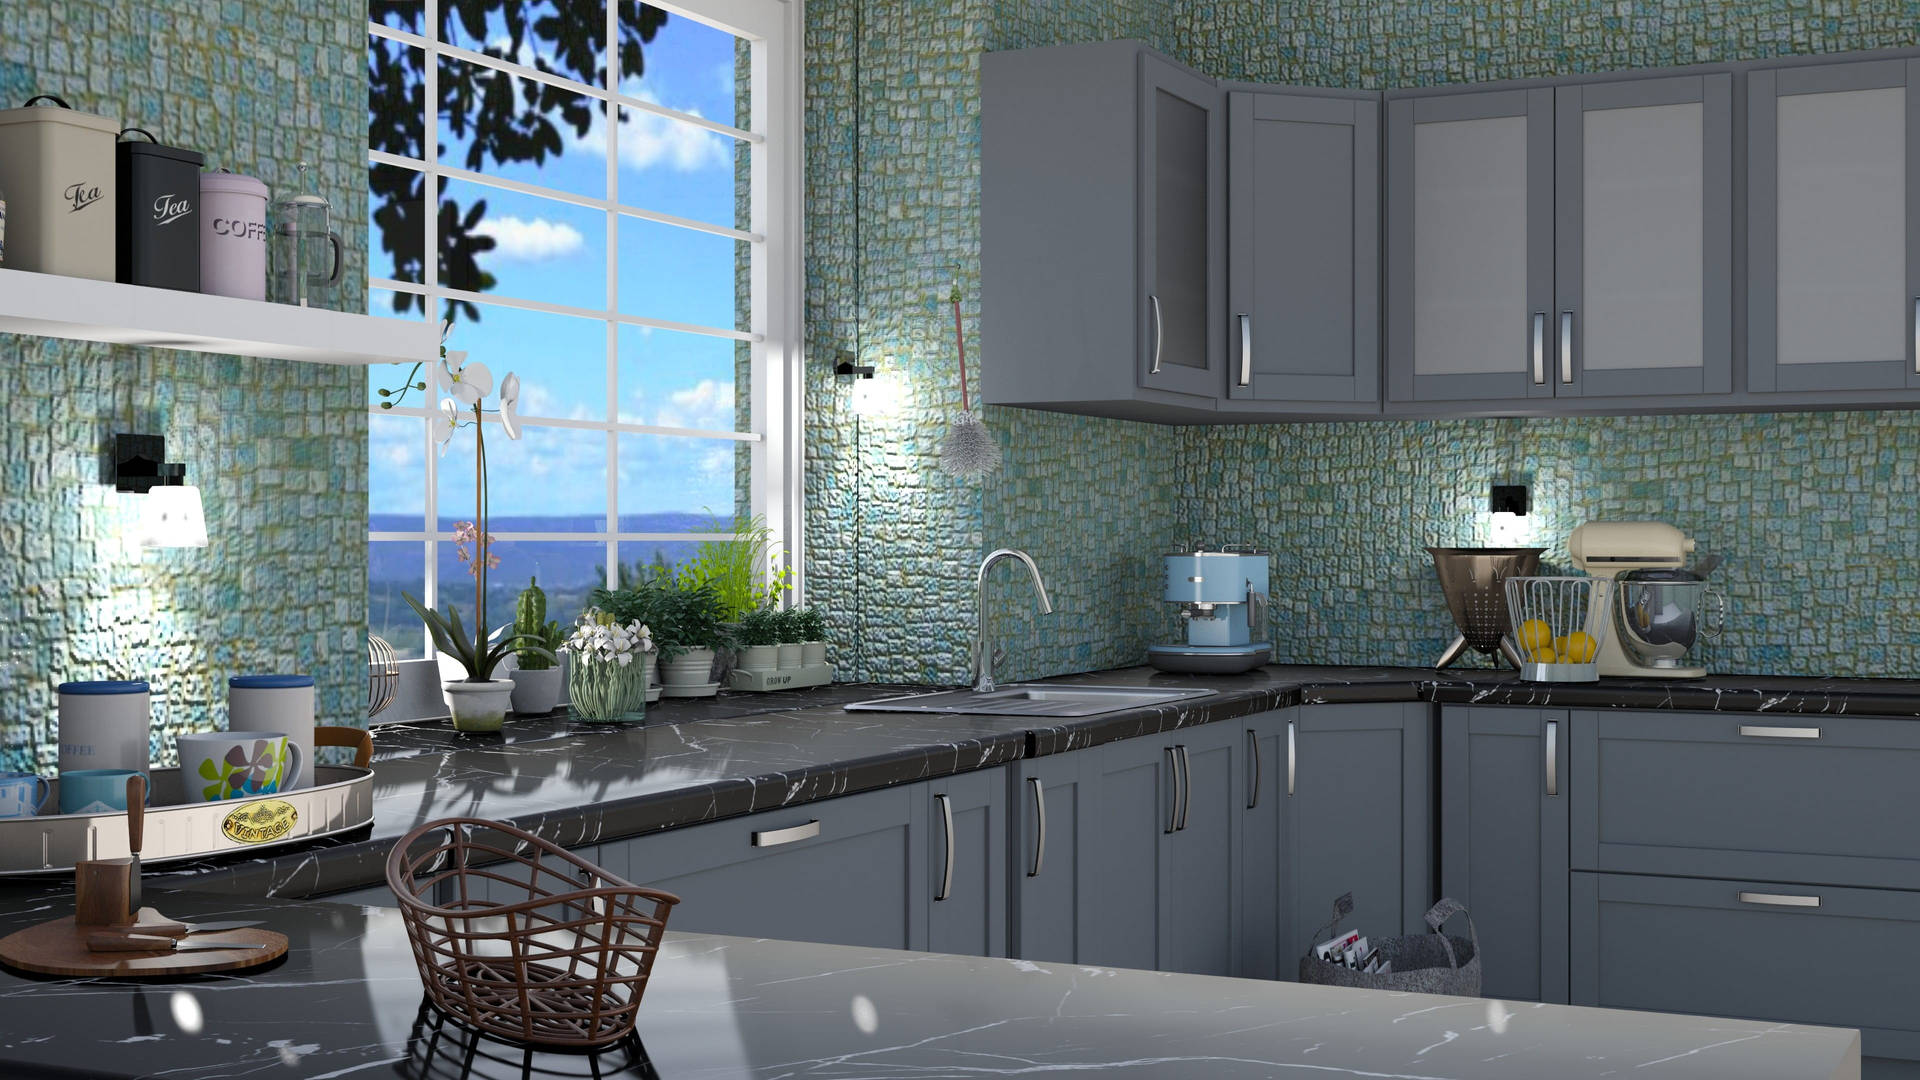 Kitchen Design With Tiled Walls Wallpaper